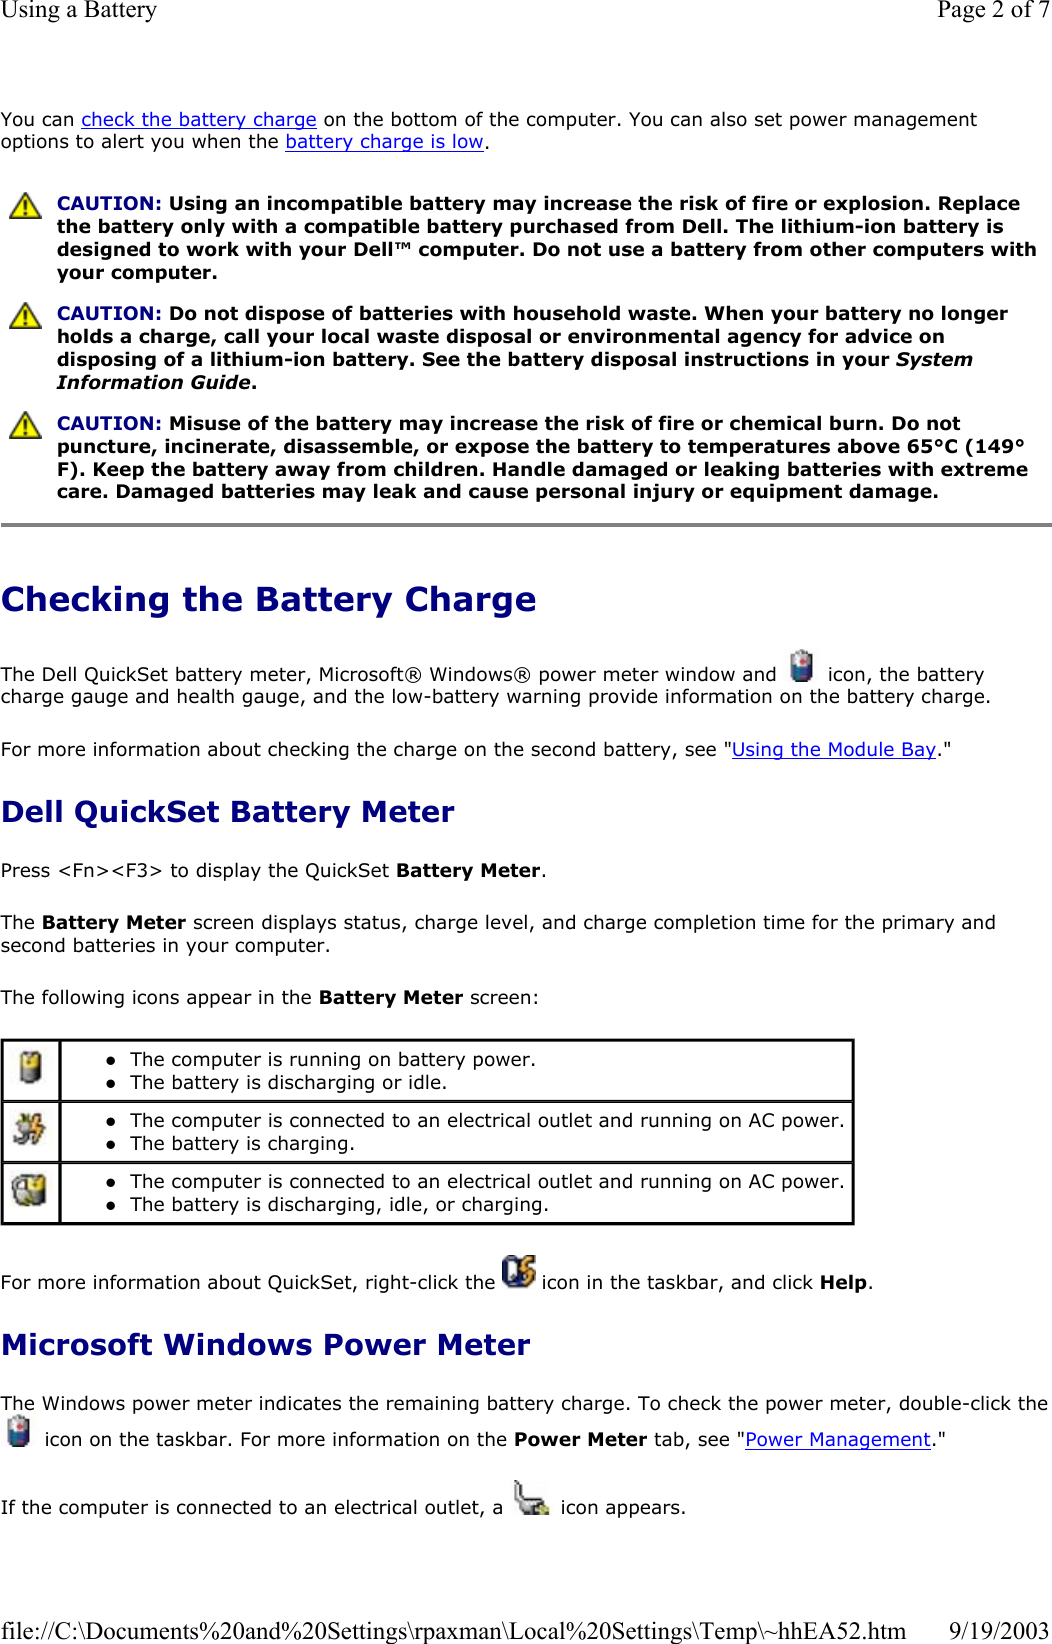 You can check the battery charge on the bottom of the computer. You can also set power management options to alert you when the battery charge is low. Checking the Battery Charge The Dell QuickSet battery meter, Microsoft® Windows® power meter window and   icon, the battery charge gauge and health gauge, and the low-battery warning provide information on the battery charge.  For more information about checking the charge on the second battery, see &quot;Using the Module Bay.&quot; Dell QuickSet Battery Meter Press &lt;Fn&gt;&lt;F3&gt; to display the QuickSet Battery Meter. The Battery Meter screen displays status, charge level, and charge completion time for the primary and second batteries in your computer. The following icons appear in the Battery Meter screen: For more information about QuickSet, right-click the   icon in the taskbar, and click Help. Microsoft Windows Power Meter The Windows power meter indicates the remaining battery charge. To check the power meter, double-click the icon on the taskbar. For more information on the Power Meter tab, see &quot;Power Management.&quot; If the computer is connected to an electrical outlet, a   icon appears.  CAUTION: Using an incompatible battery may increase the risk of fire or explosion. Replace the battery only with a compatible battery purchased from Dell. The lithium-ion battery is designed to work with your Dell™ computer. Do not use a battery from other computers with your computer.  CAUTION: Do not dispose of batteries with household waste. When your battery no longer holds a charge, call your local waste disposal or environmental agency for advice on disposing of a lithium-ion battery. See the battery disposal instructions in your System Information Guide.  CAUTION: Misuse of the battery may increase the risk of fire or chemical burn. Do not puncture, incinerate, disassemble, or expose the battery to temperatures above 65°C (149°F). Keep the battery away from children. Handle damaged or leaking batteries with extreme care. Damaged batteries may leak and cause personal injury or equipment damage.  zThe computer is running on battery power.  zThe battery is discharging or idle.   zThe computer is connected to an electrical outlet and running on AC power. zThe battery is charging.   zThe computer is connected to an electrical outlet and running on AC power. zThe battery is discharging, idle, or charging.  Page 2 of 7Using a Battery9/19/2003file://C:\Documents%20and%20Settings\rpaxman\Local%20Settings\Temp\~hhEA52.htm